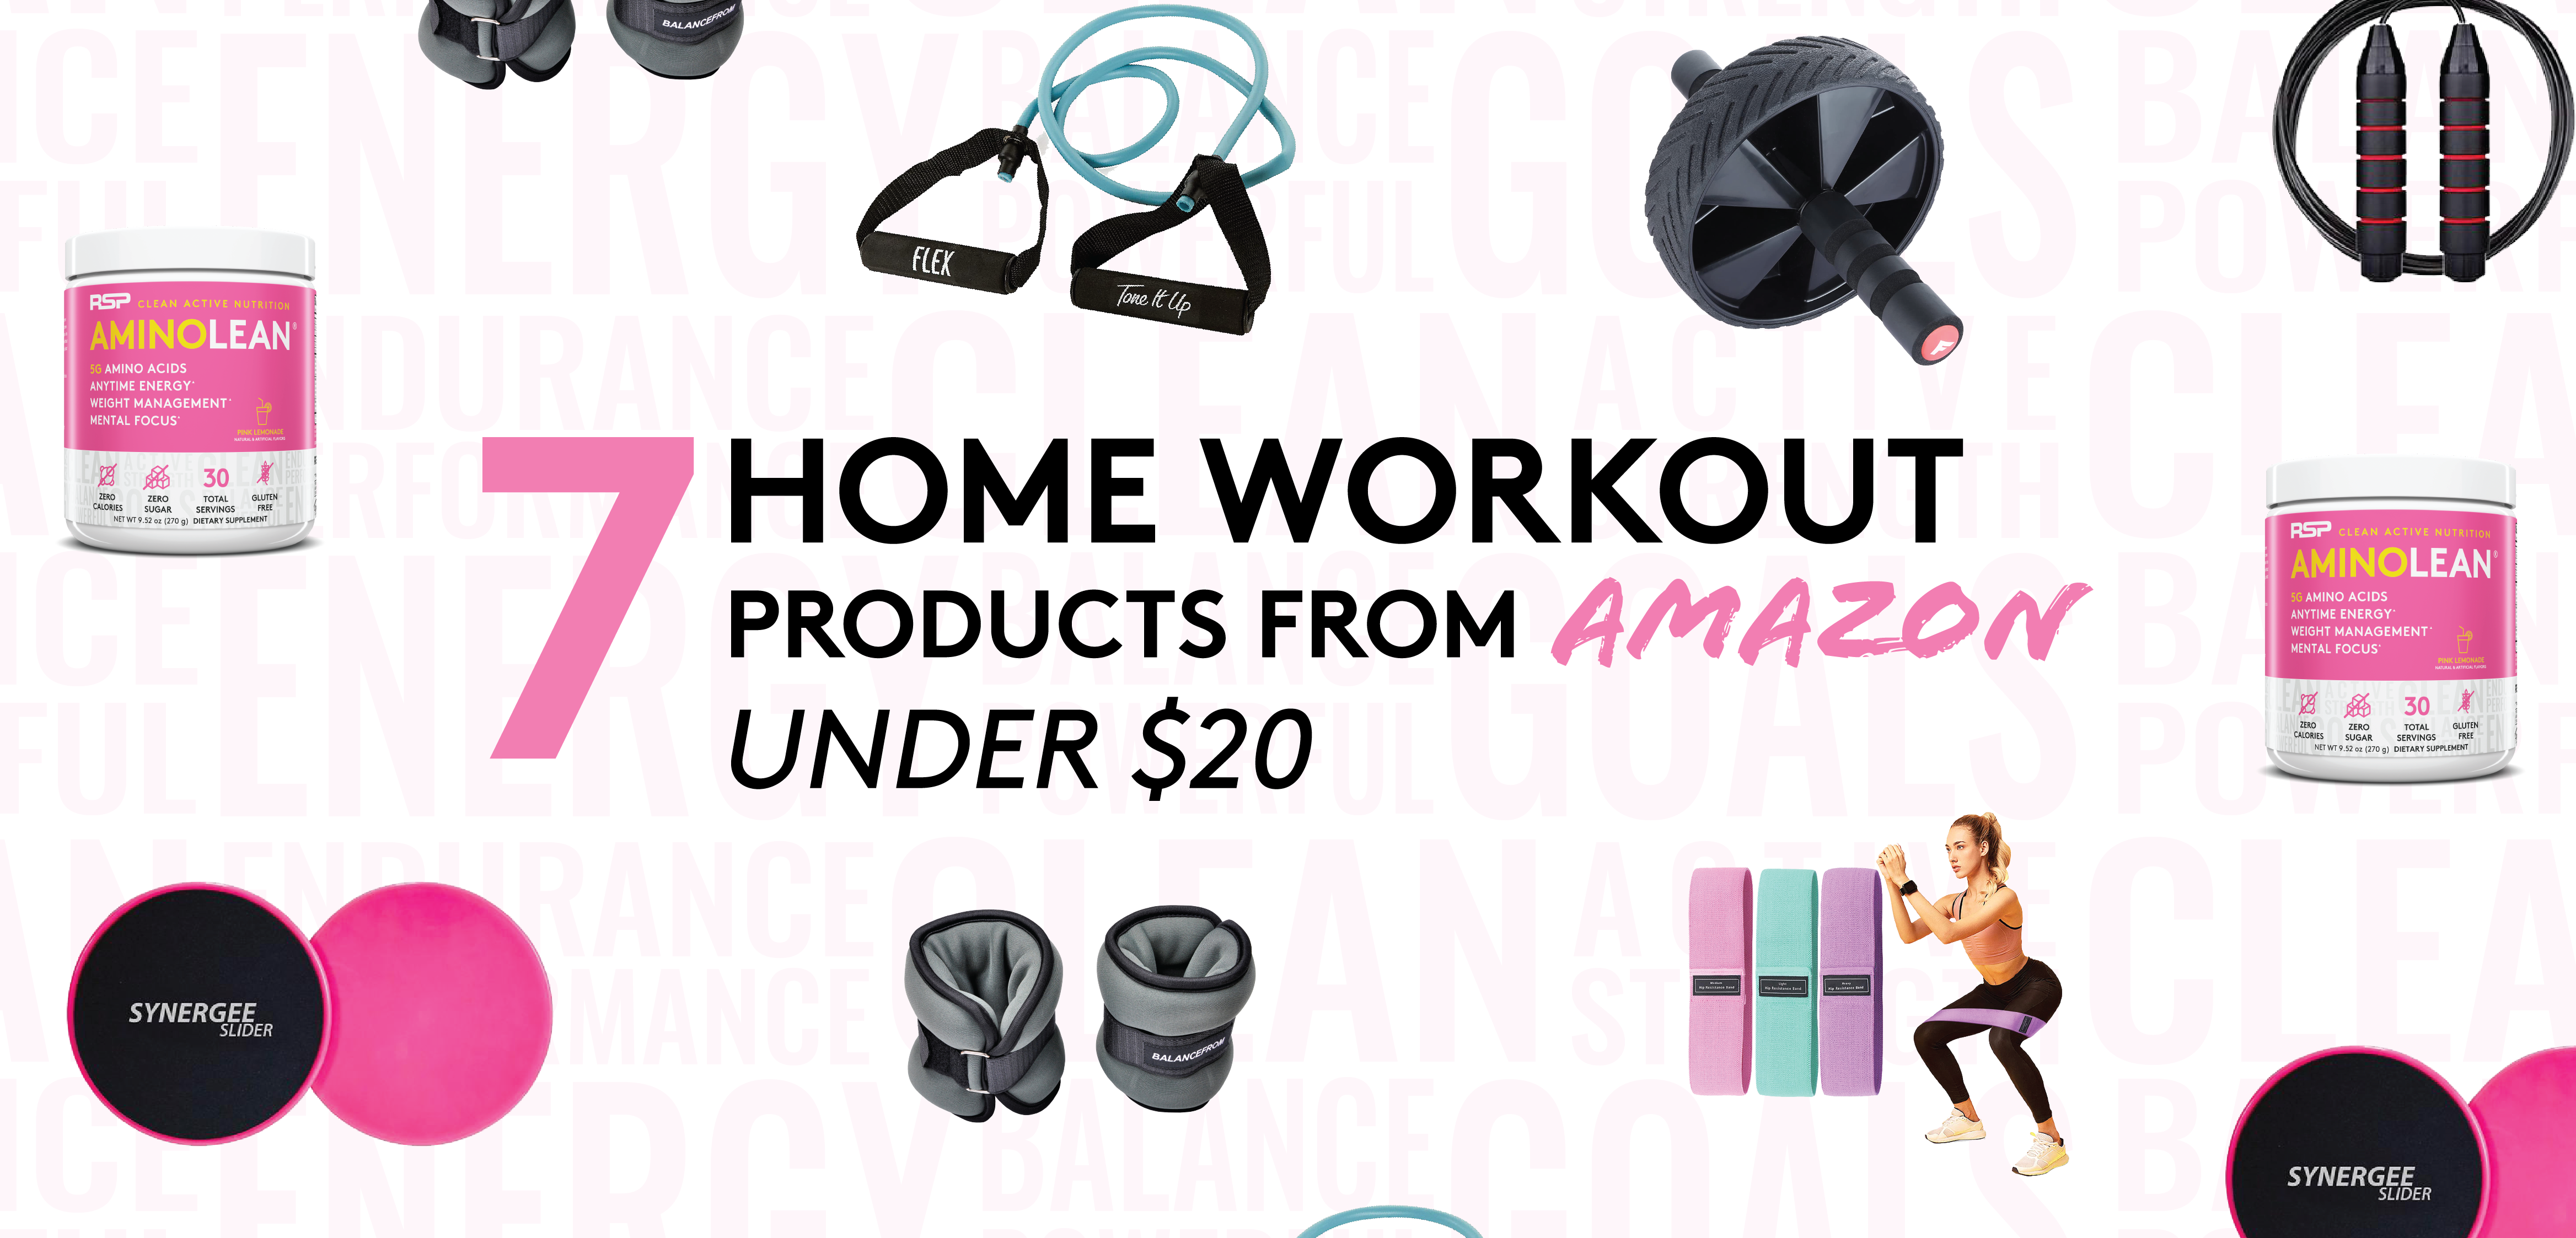 Seven home workout products from Amazon for under $20 like resistance bands, amino lean pre workout, and a jump rope